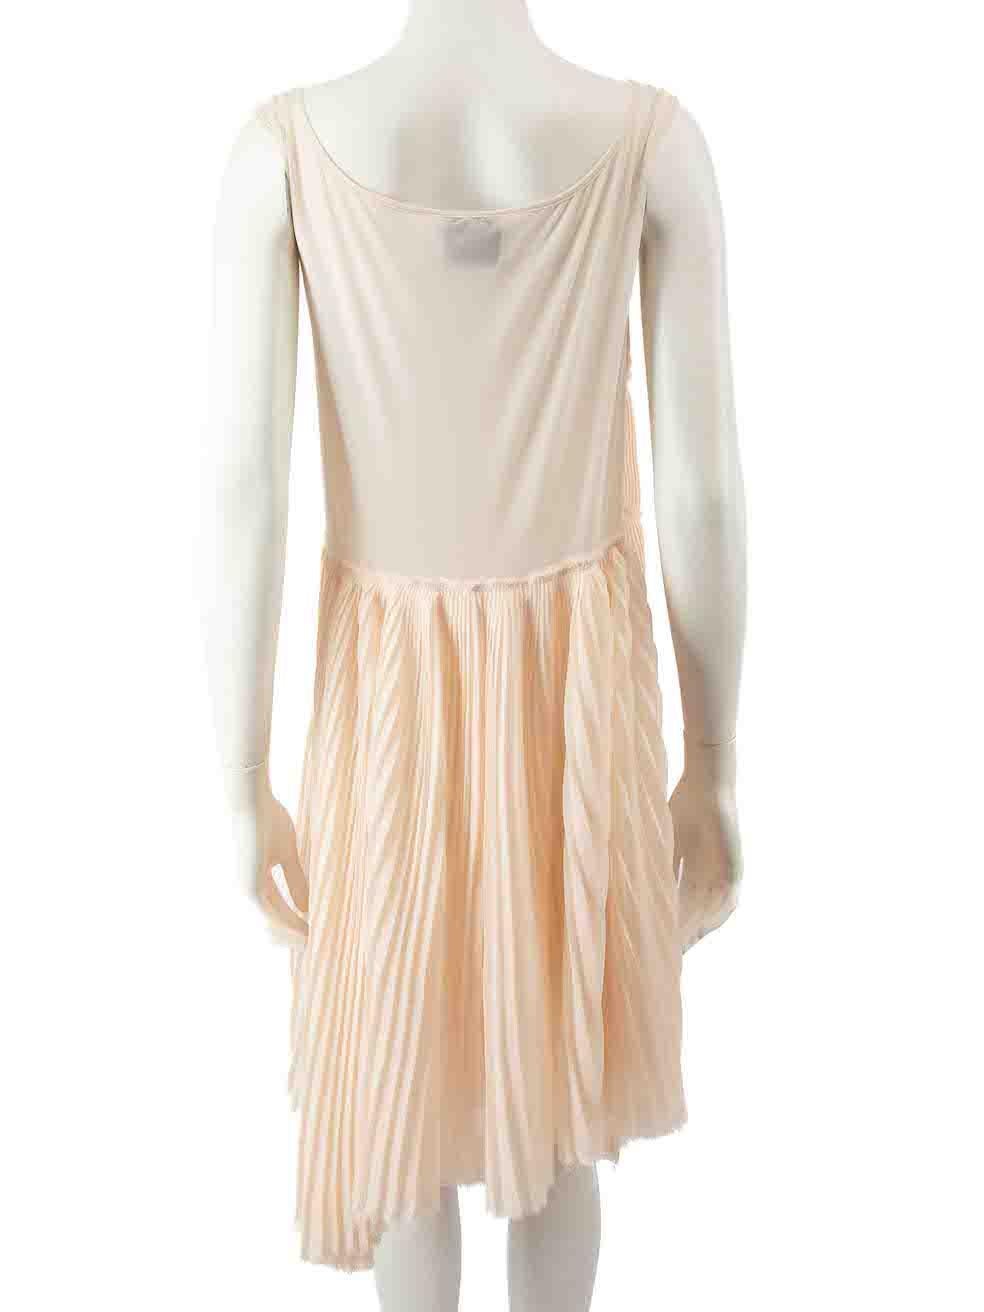 Acne Studios Light Peach Pleated Mini Dress Size L In Excellent Condition For Sale In London, GB